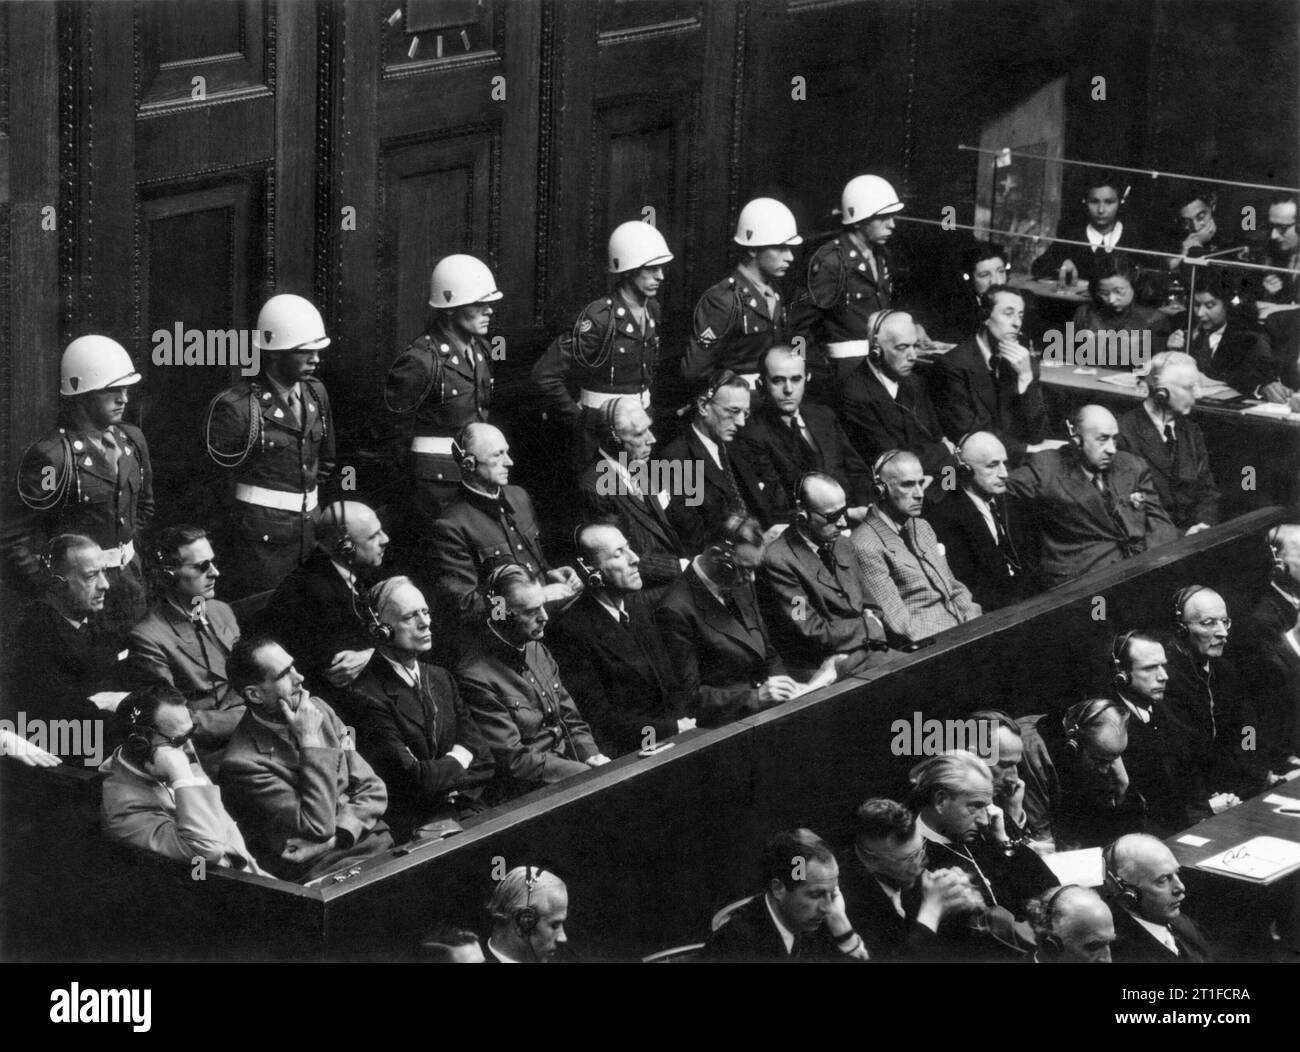 The Second World War 1939 - 1945- Victory and Aftermath Defendants in the dock during the Nuremberg war crimes trials. Left to right: Goering, Hess, Ribbentrop, Keitel, Kaltenbrunner, Rosenberg, Frank, Frick, Streicher, Funk, Schacht, Doenitz, Raeder, Schirach, Sauckel, Jodl, von Papen, von Seyss-Inquart, Speer, von Neurath and H Fritzsche. The trials ended in October 1946 with the execution of 19 of the principal defendants. Similar trials were conducted in Tokyo with respect to the Japanese. Stock Photo